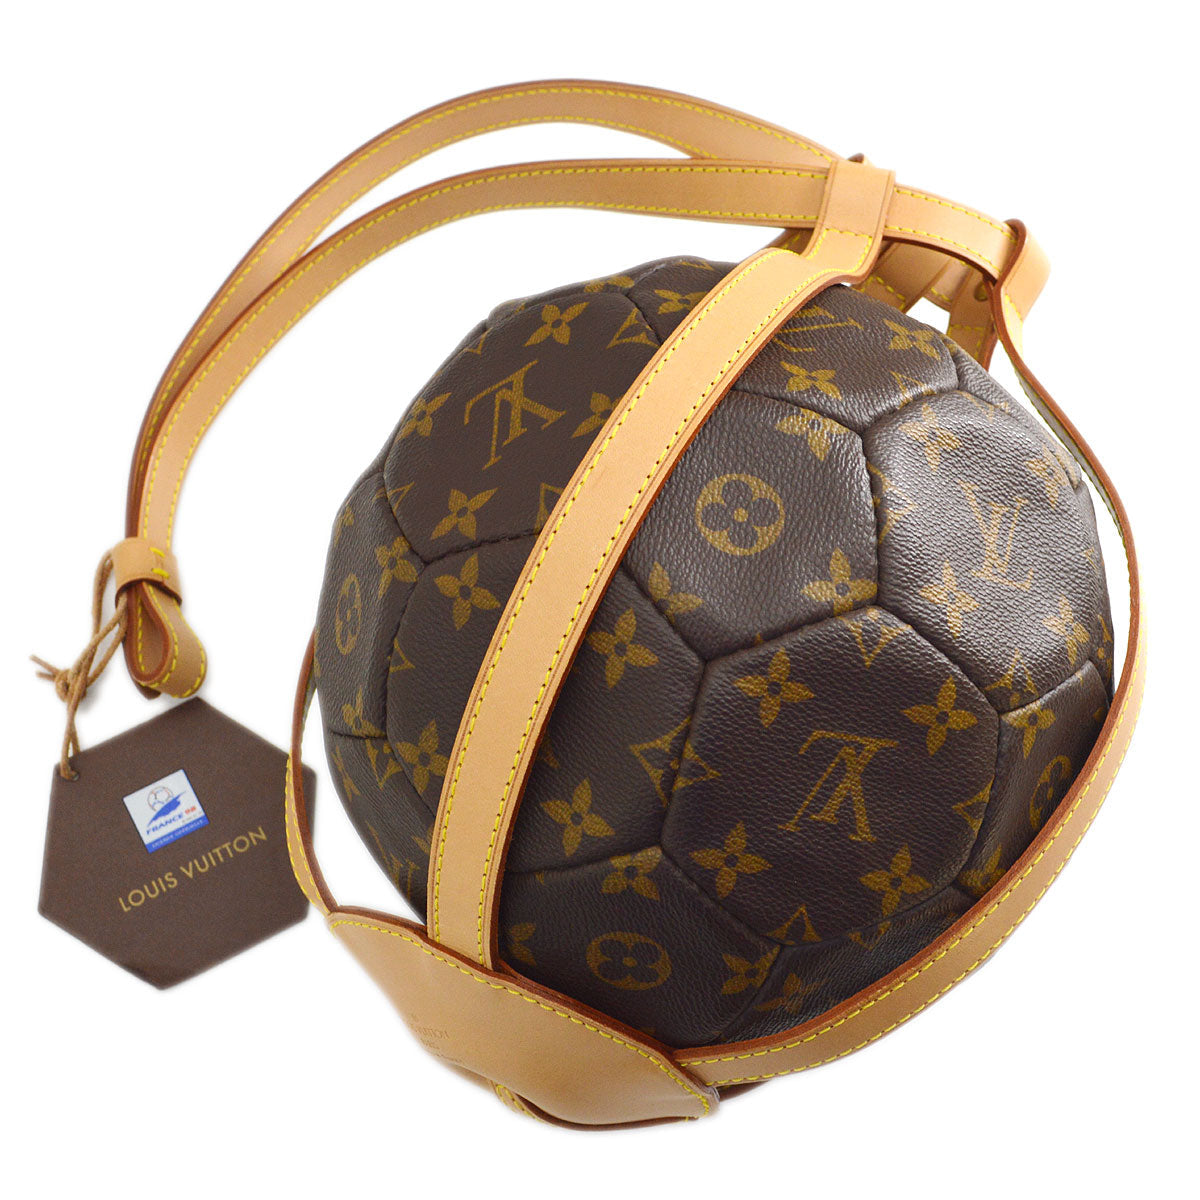 LOUIS VUITTON 1998 FRANCE WORLD CUP SOCCER BALL M99054 – AMORE